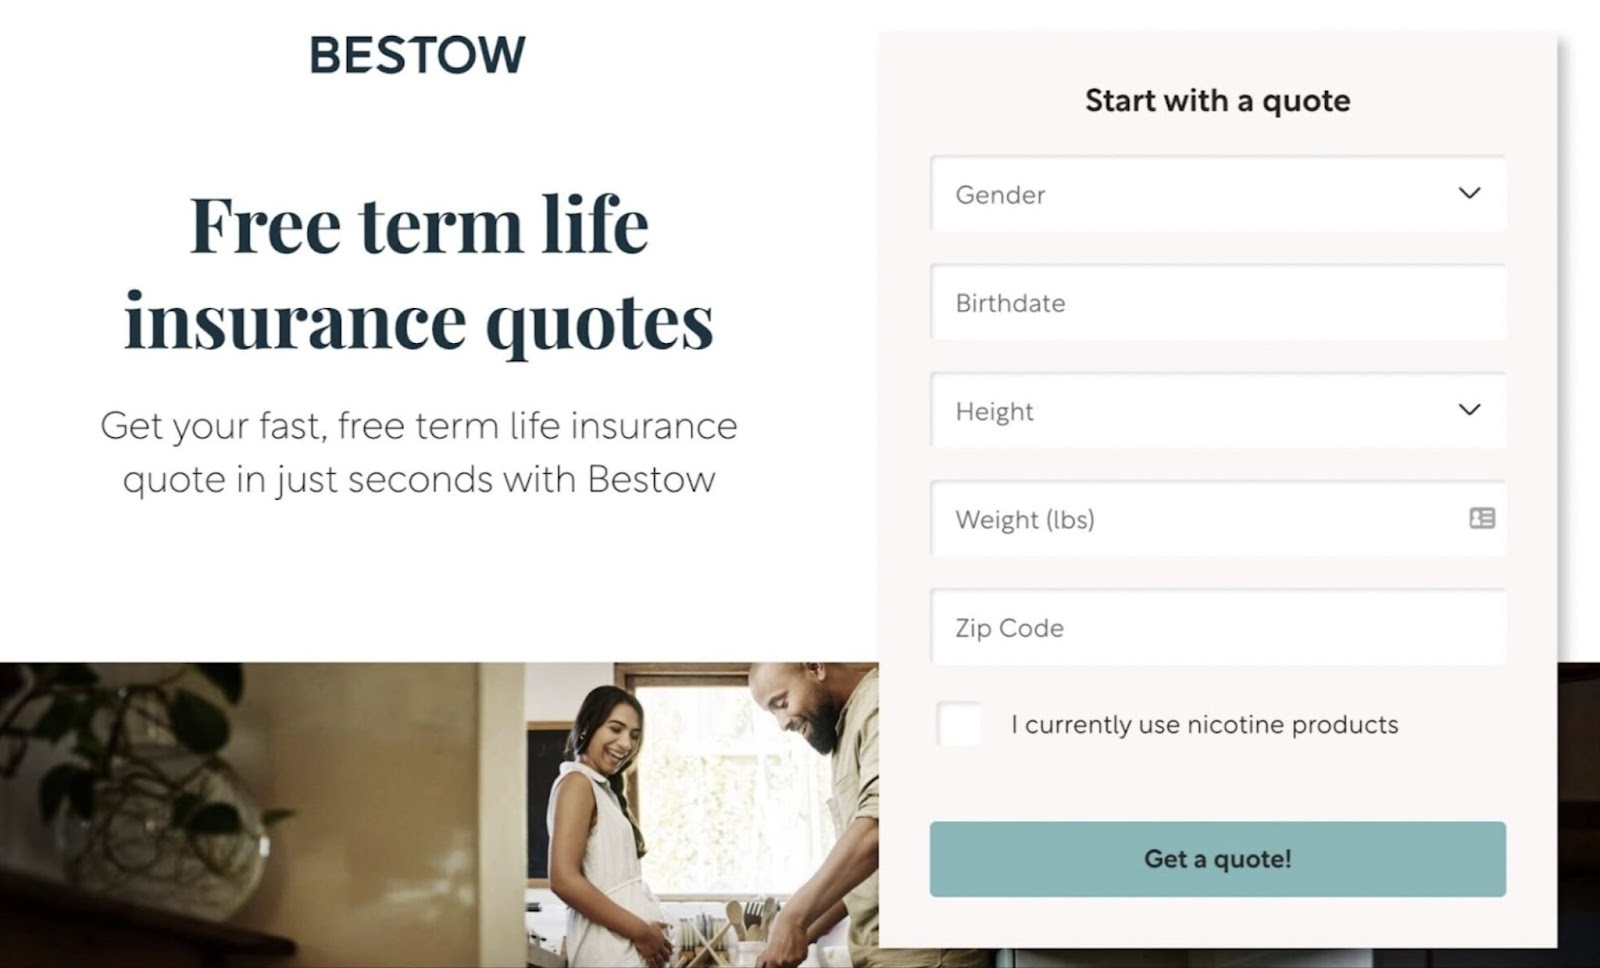 Life insurance quote form from Bestow alongside image of a smiling couple